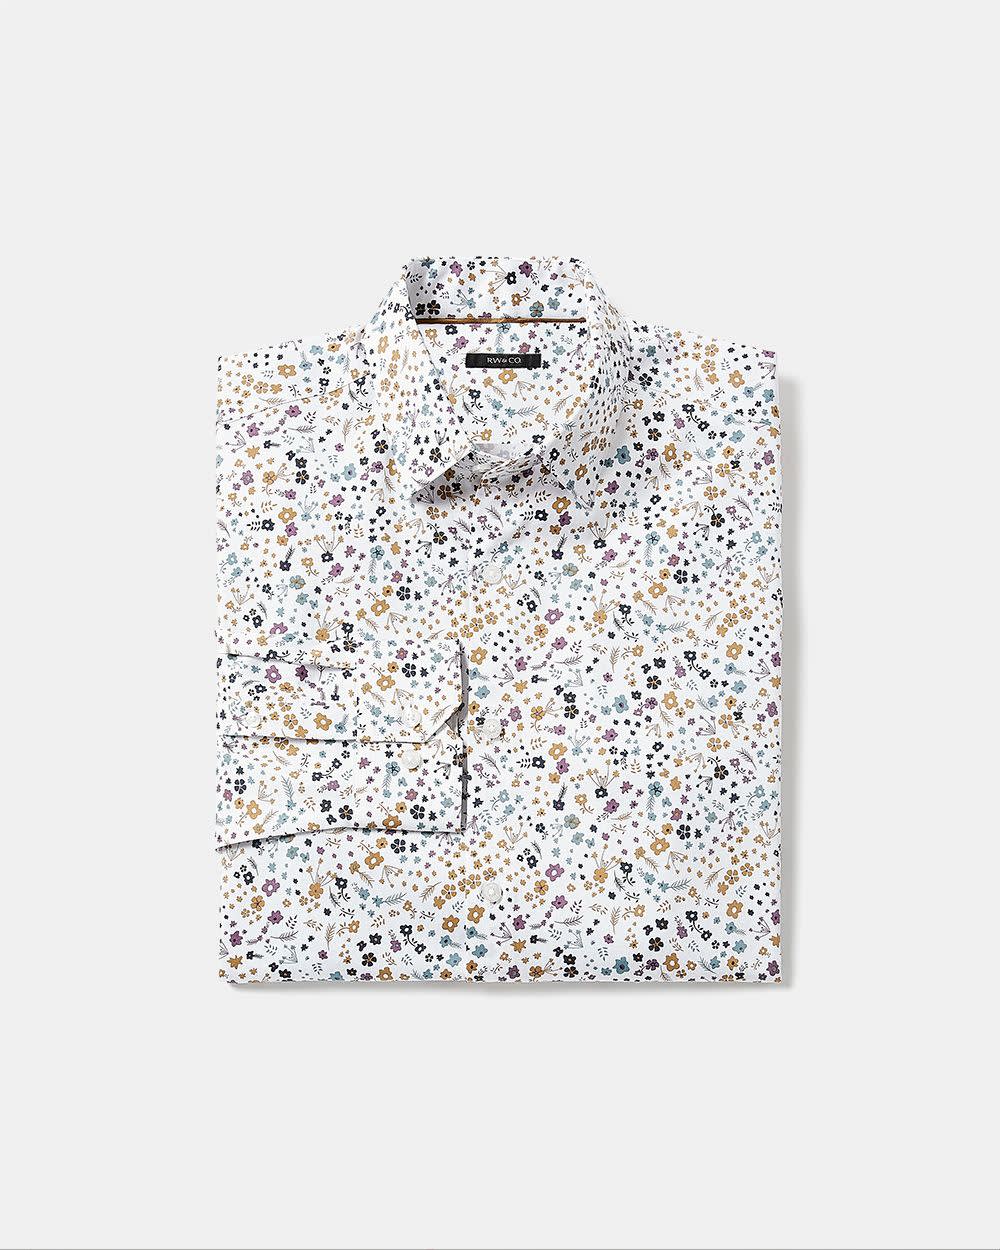 Slim Fit White Dress Shirt with Floral Pattern | RW&CO.